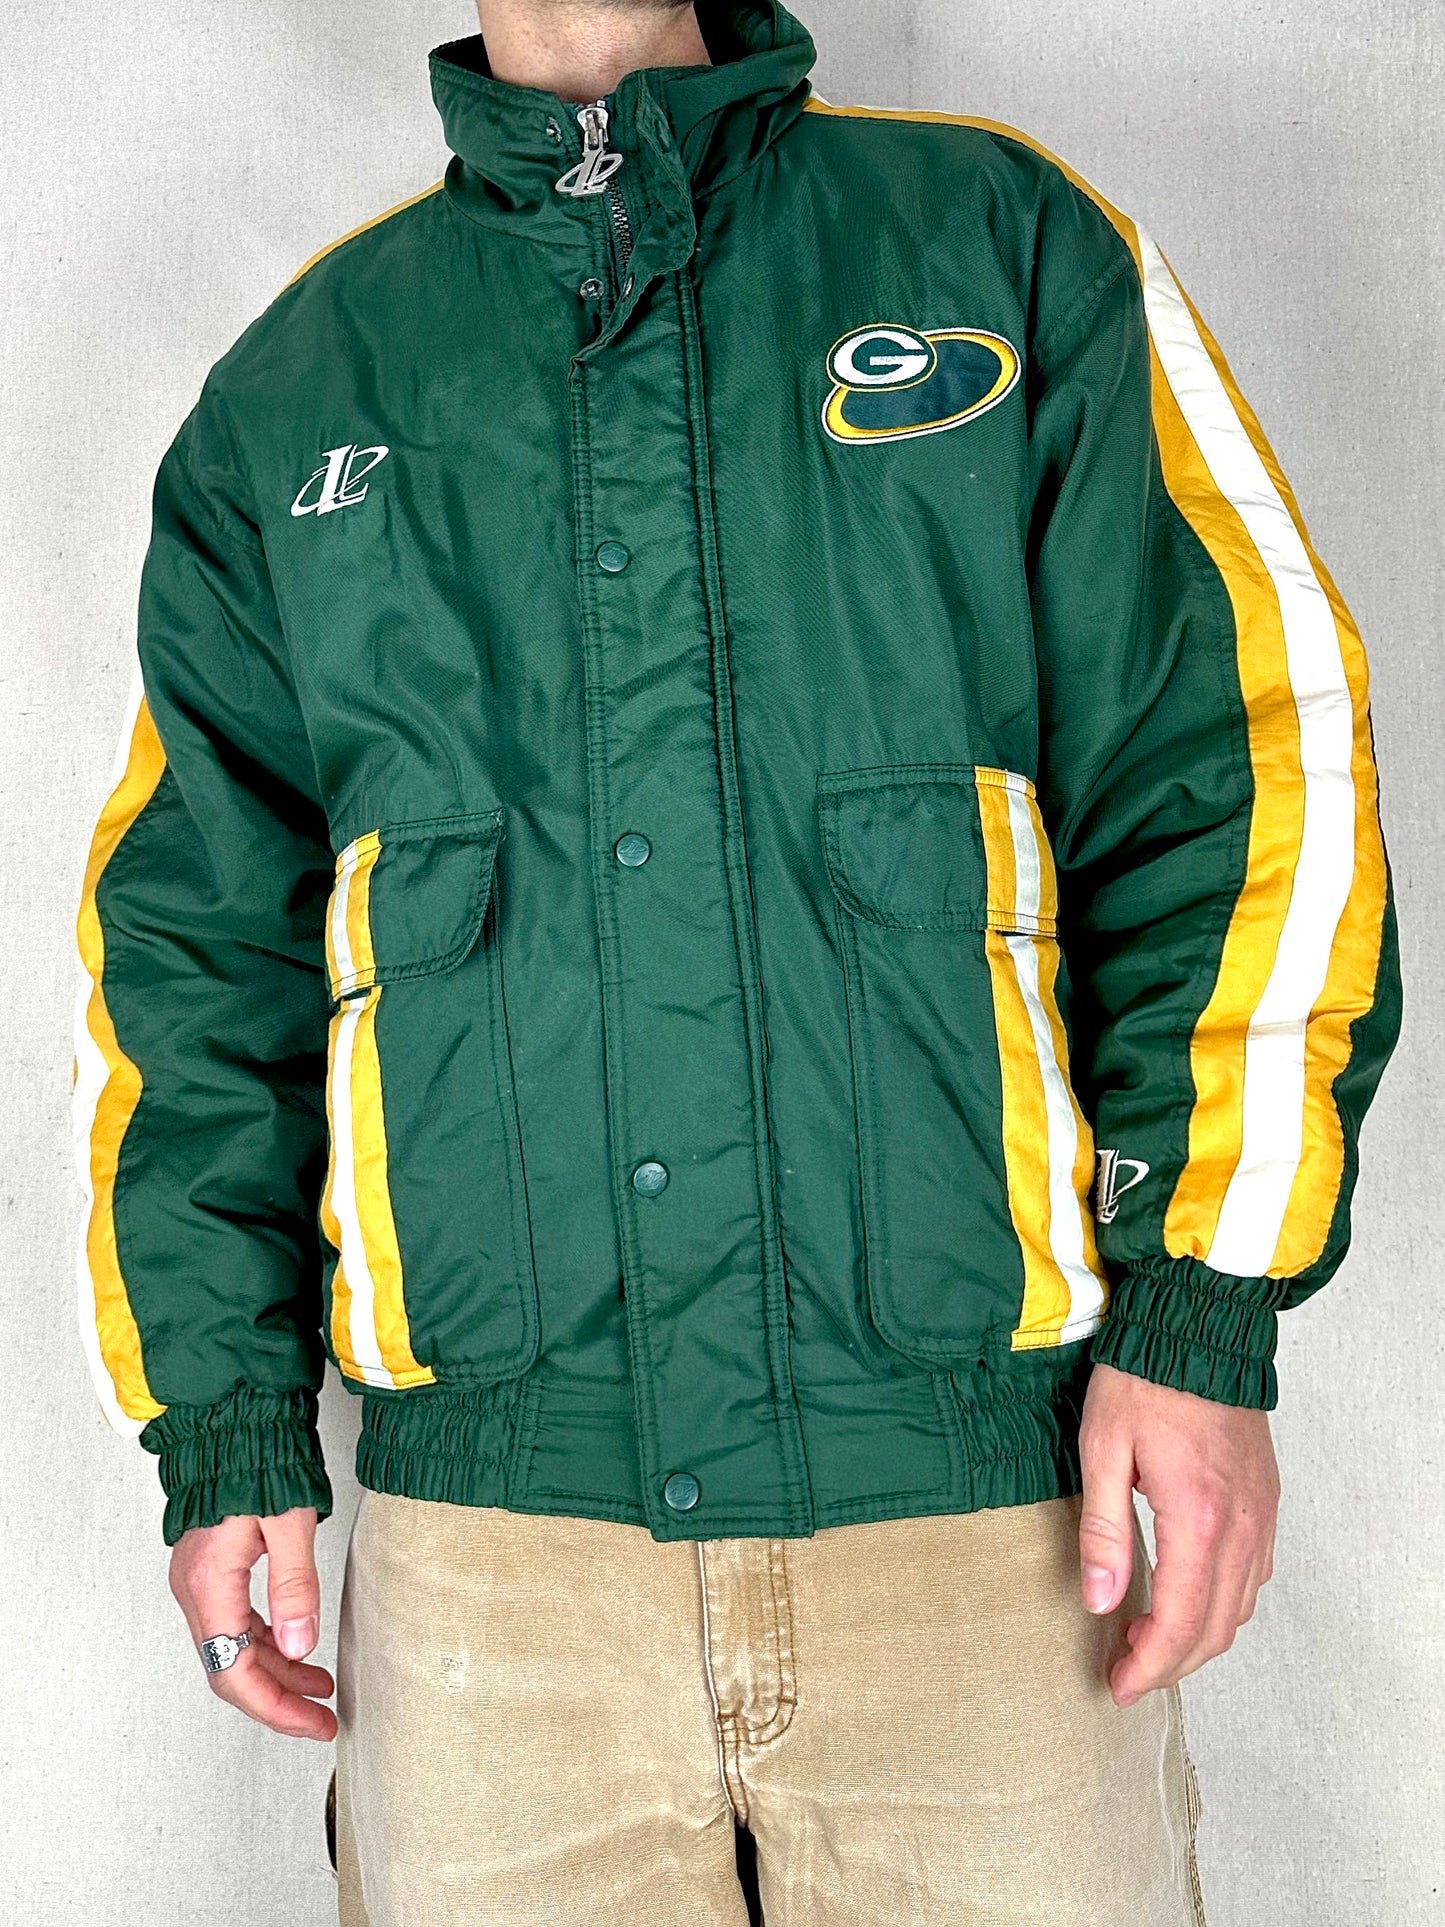 90's Green Bay Packers NFL Embroidered Puffer Jacket Size L